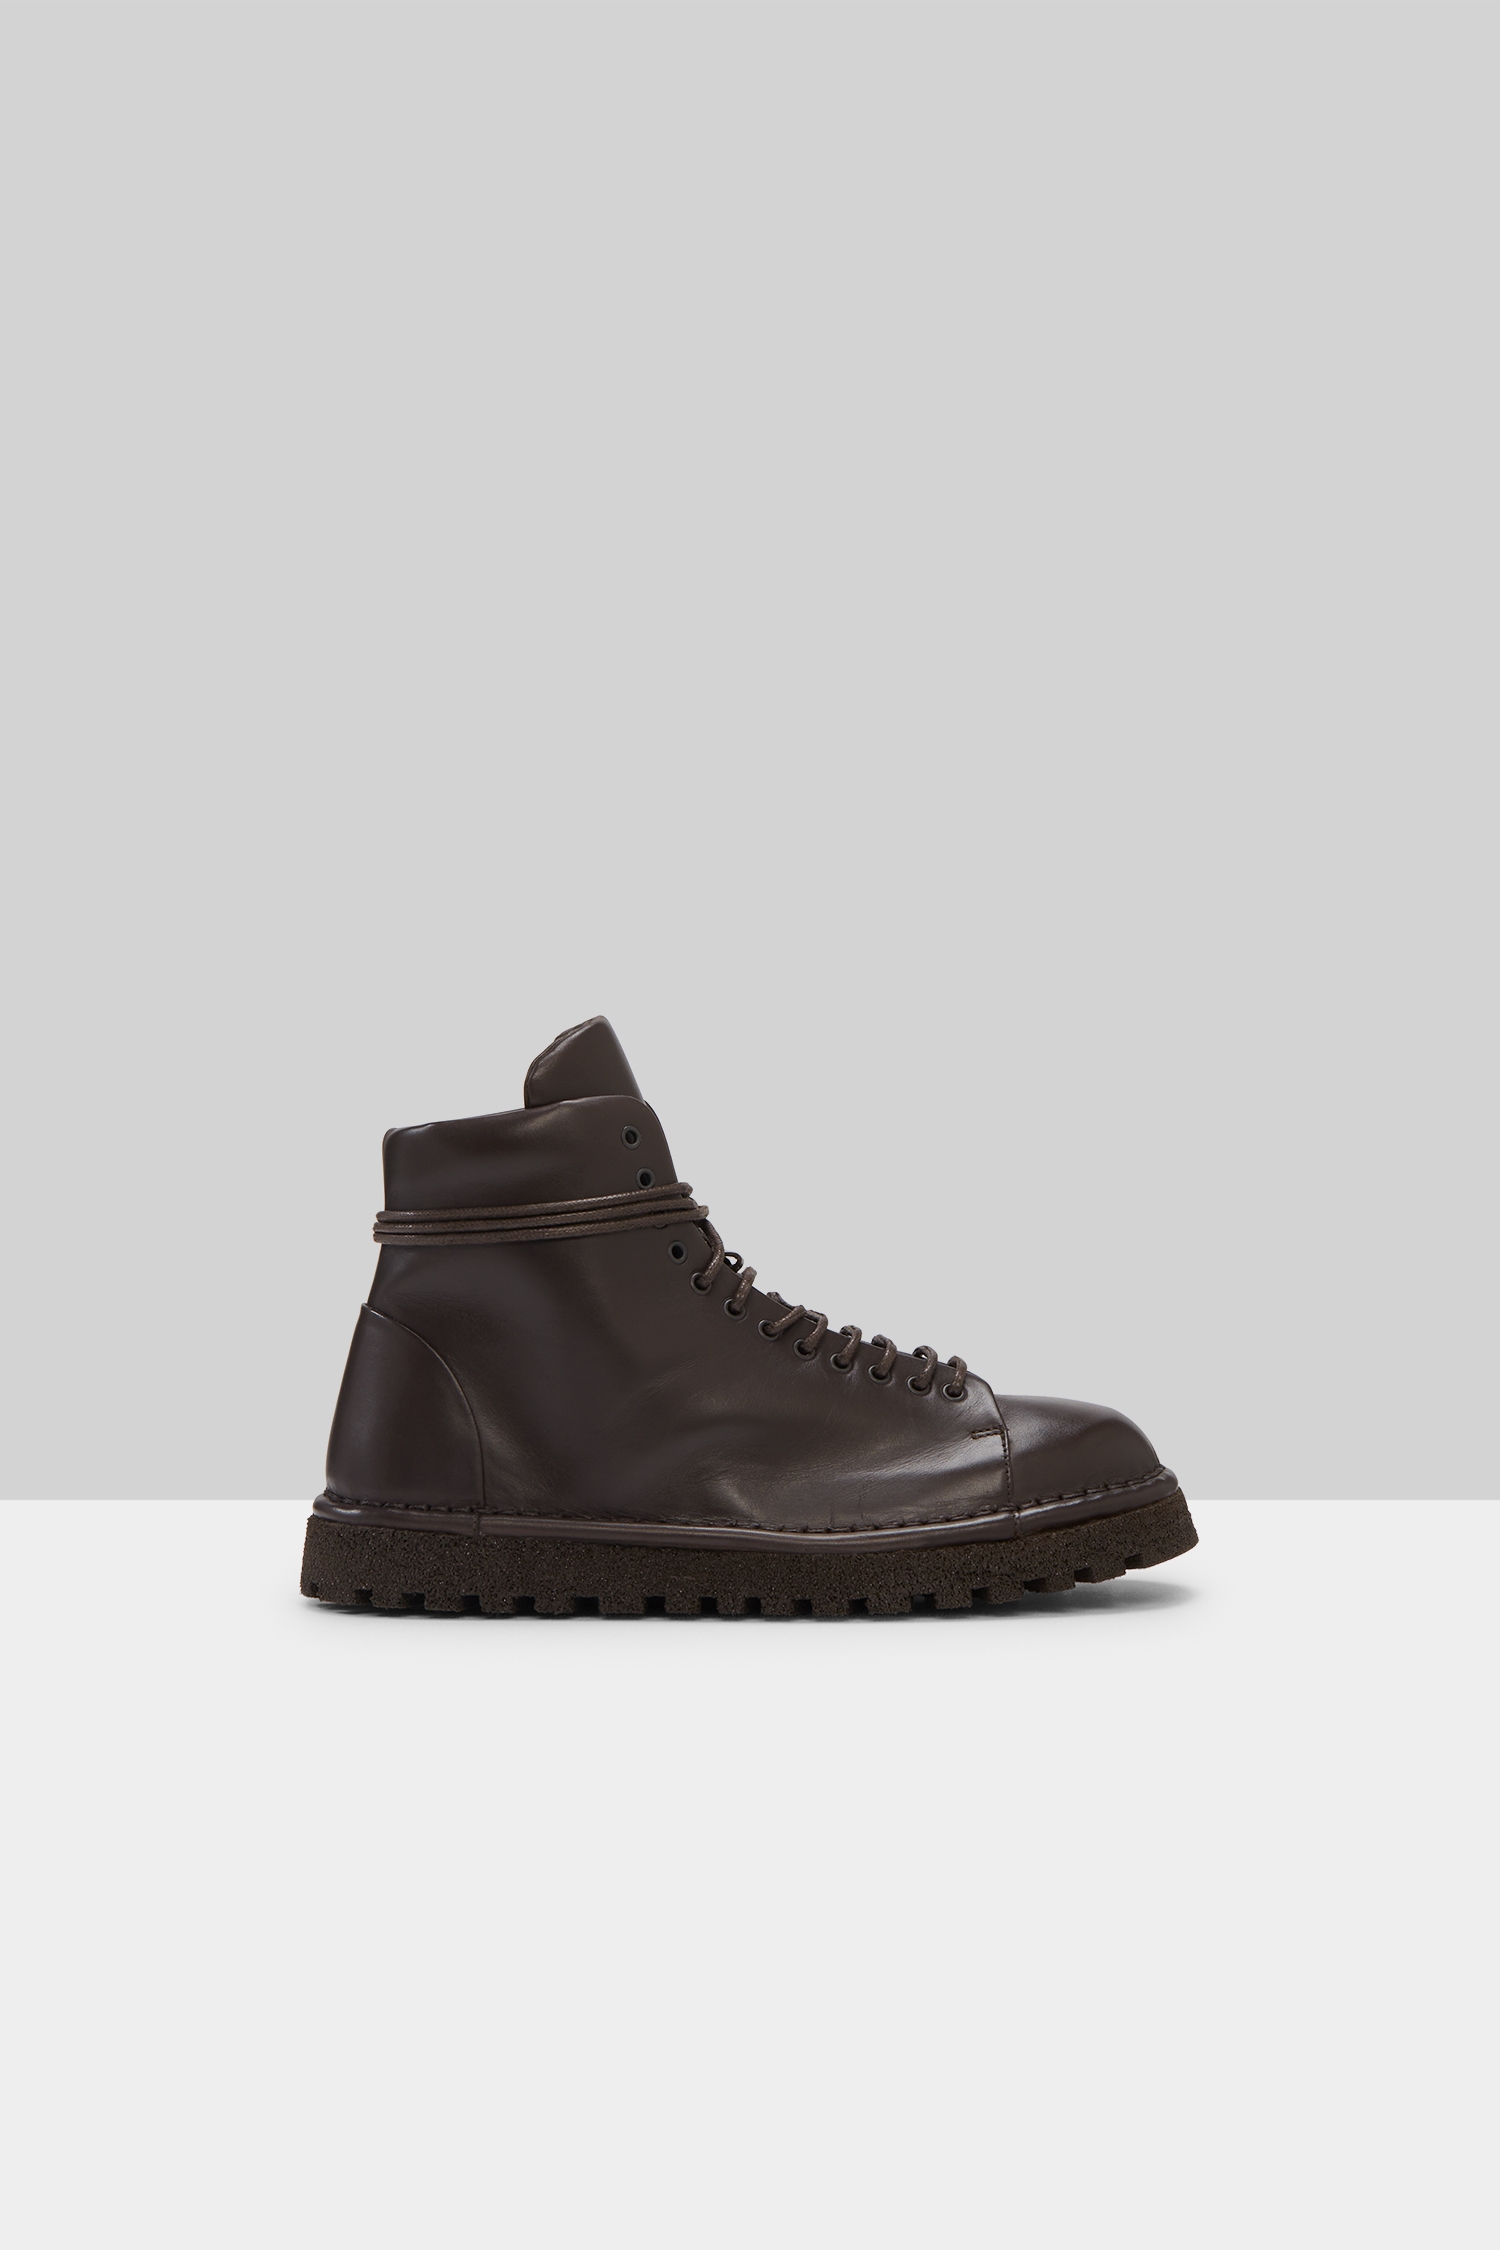 Pallottola Pomice Lace Up Ankle Boot Dark Chocolate